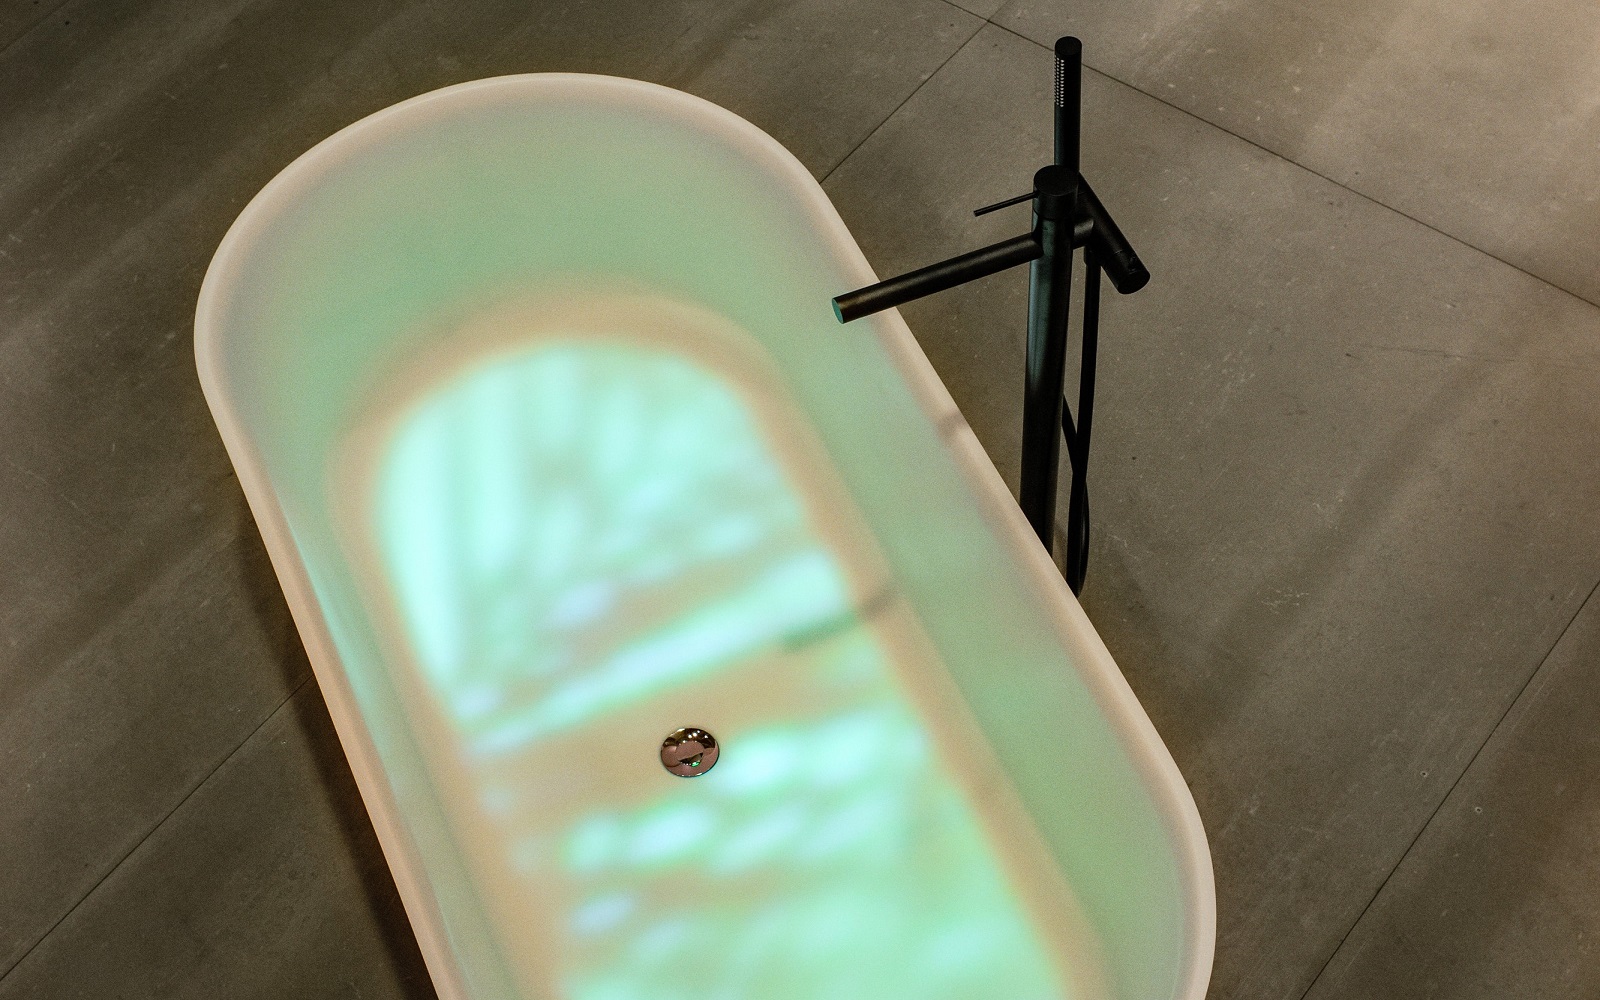 freestanding bath with light reflections in the water and black pillar tap